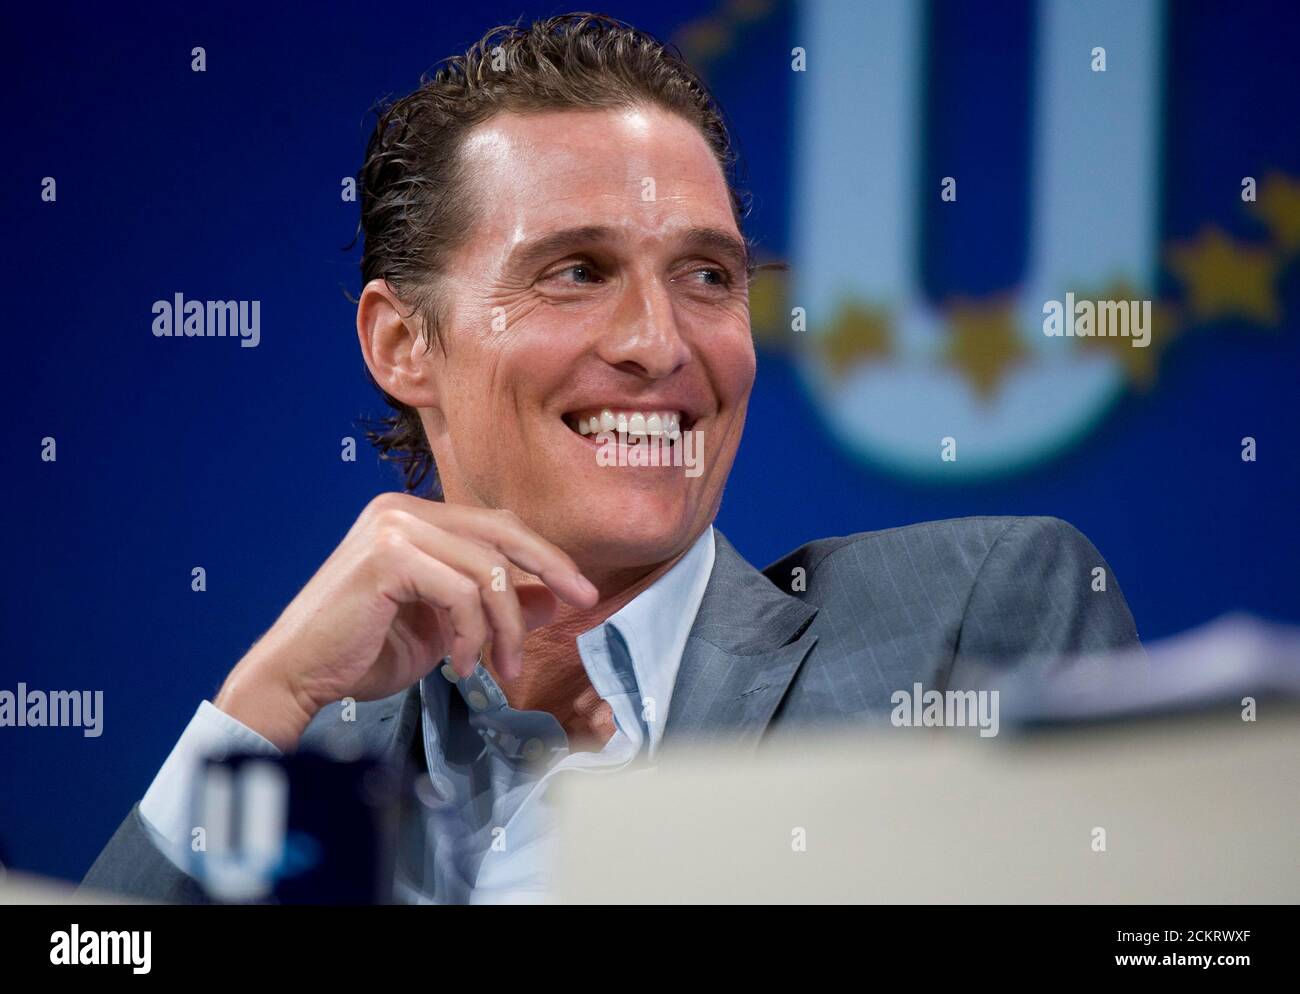 Austin, TX February 14, 2009: Actor Matthew McConaughey listens during a seminar at the second annual Clinton Global Initiative University, a conference bringing together more than 1,000 students to take action on global challenges such as poverty, hunger, energy, climate change and global health. ©Bob Daemmrich Stock Photo